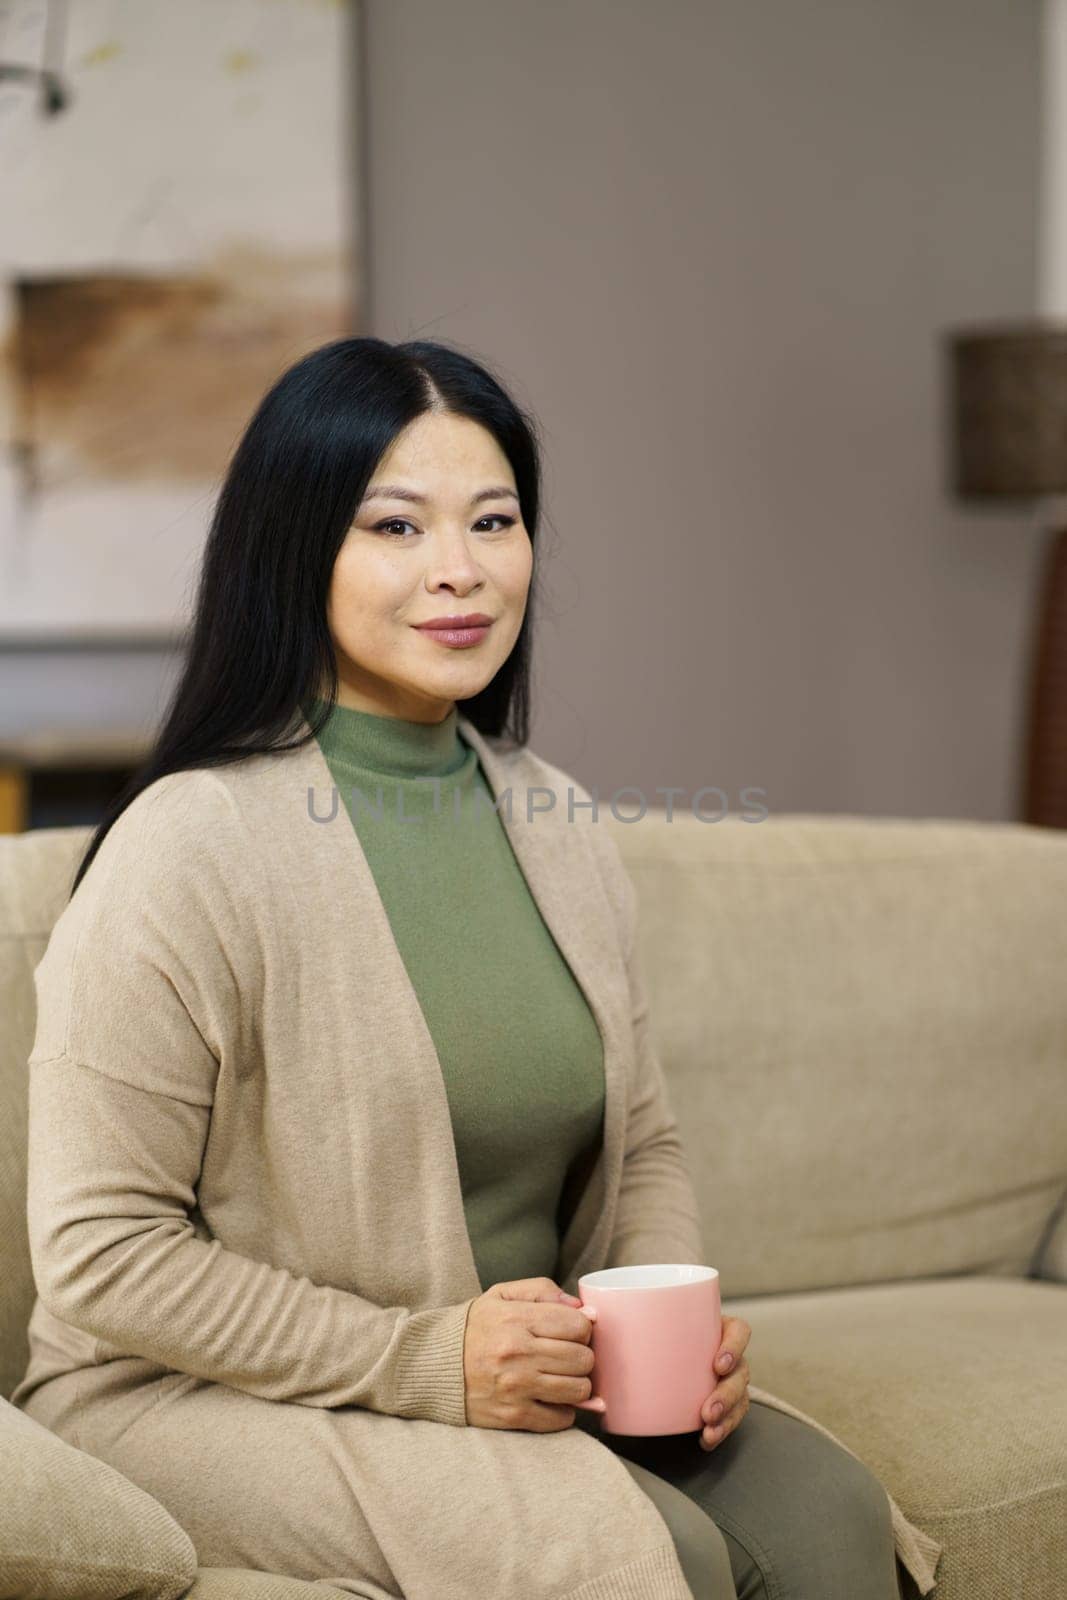 Cute Asian MILF sitting on couch with cup of coffee home. The image captures moment of relaxation and leisure as woman enjoys her coffee break in comfort of her own home. . High quality photo